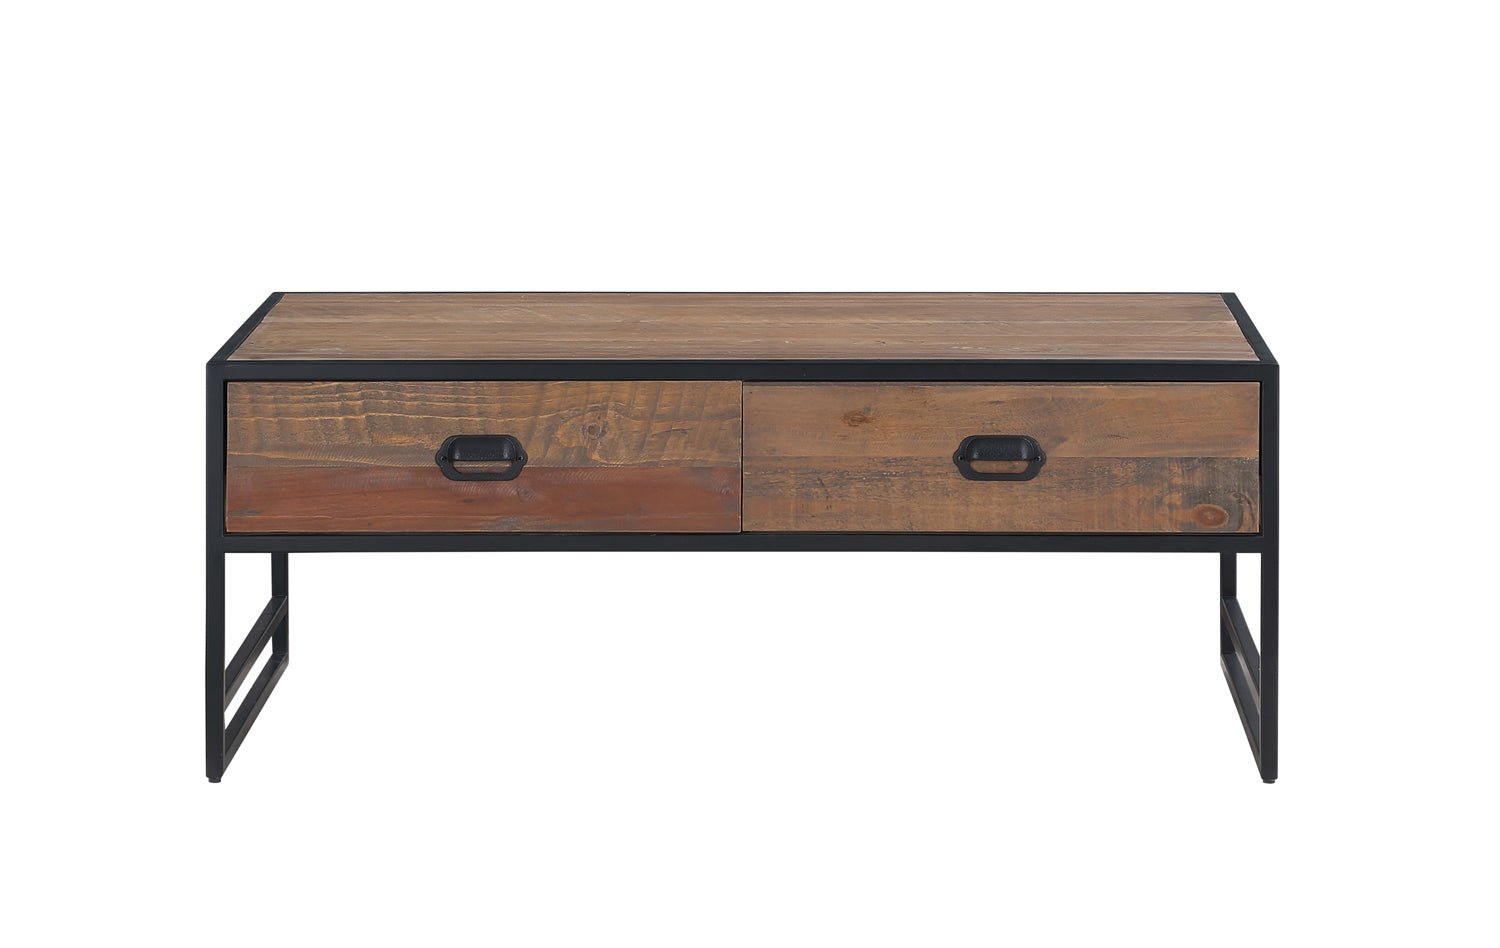 Ooki Coffee Table With Four Drawers - Duck Barn Interiors